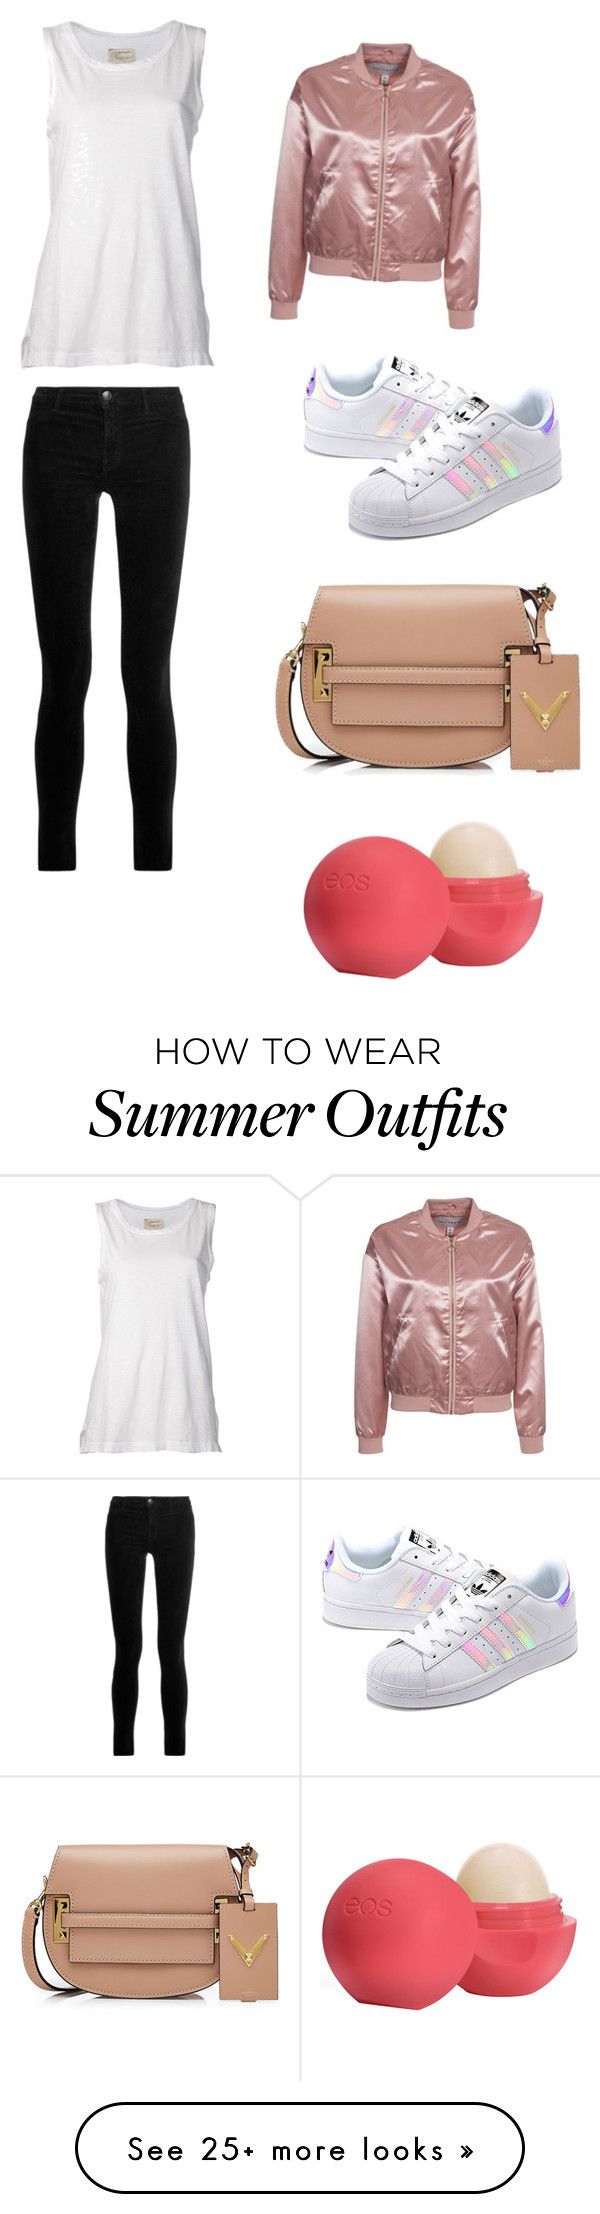 "Fun Casual Outfit ☀️" by lsantana13 on Polyvore featuring Current...